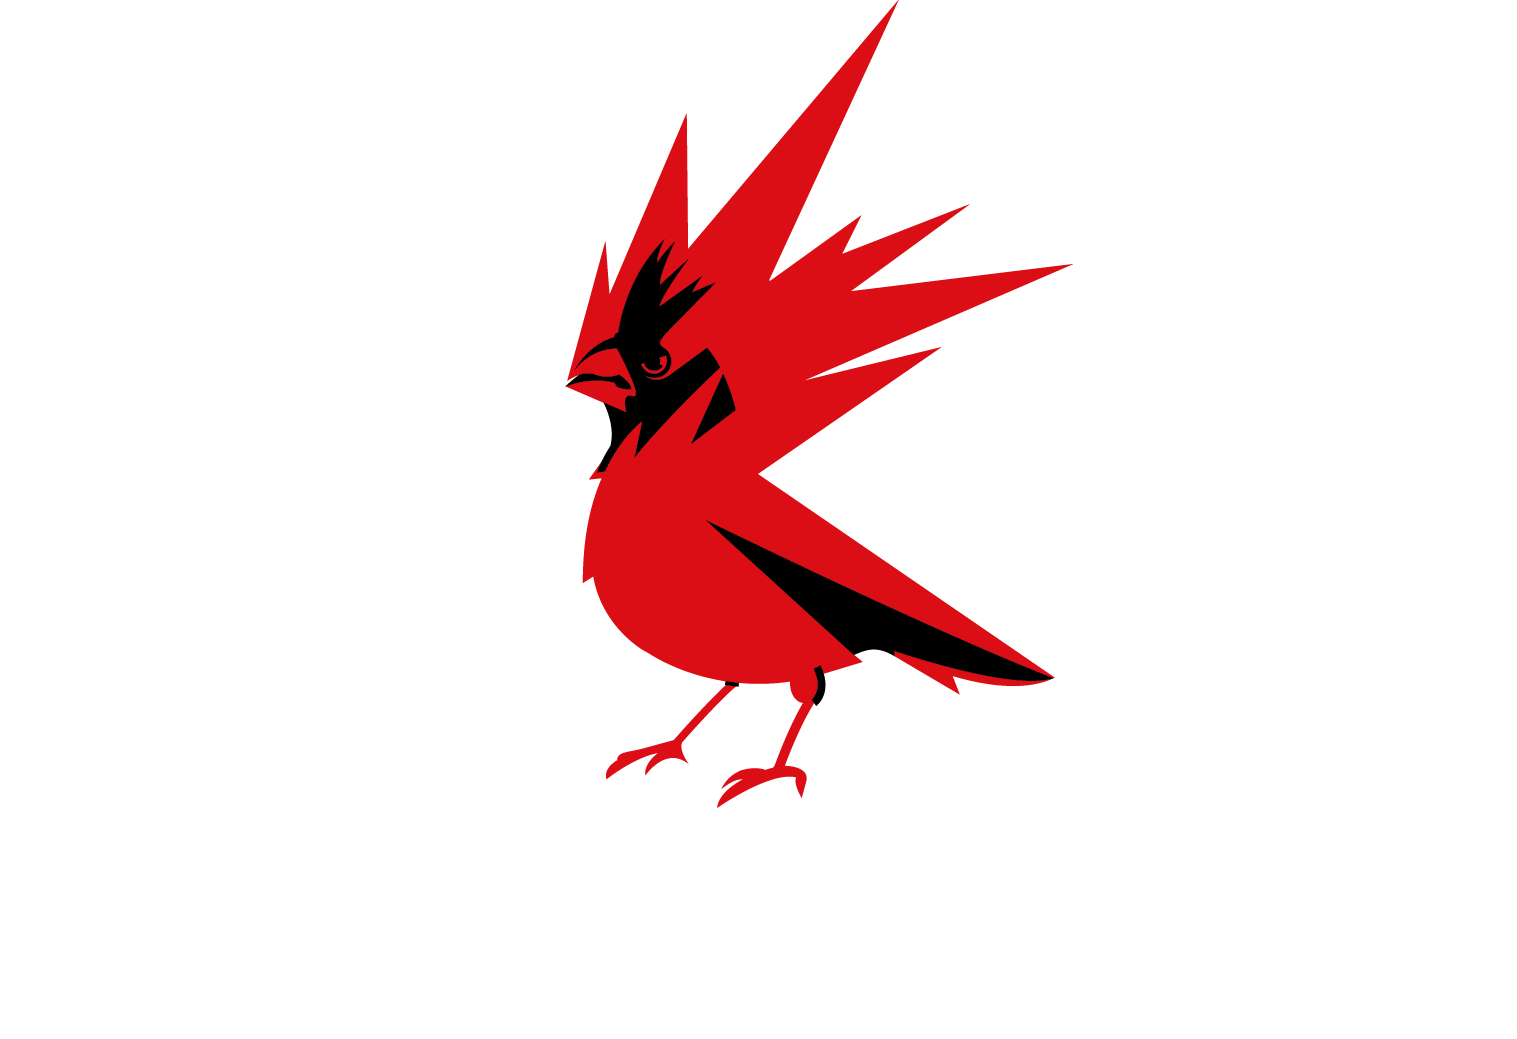 White and Red Bird Logo - CD Projekt RED Unveil New Studio & The Witcher 3: Wild Hunt Logo ...